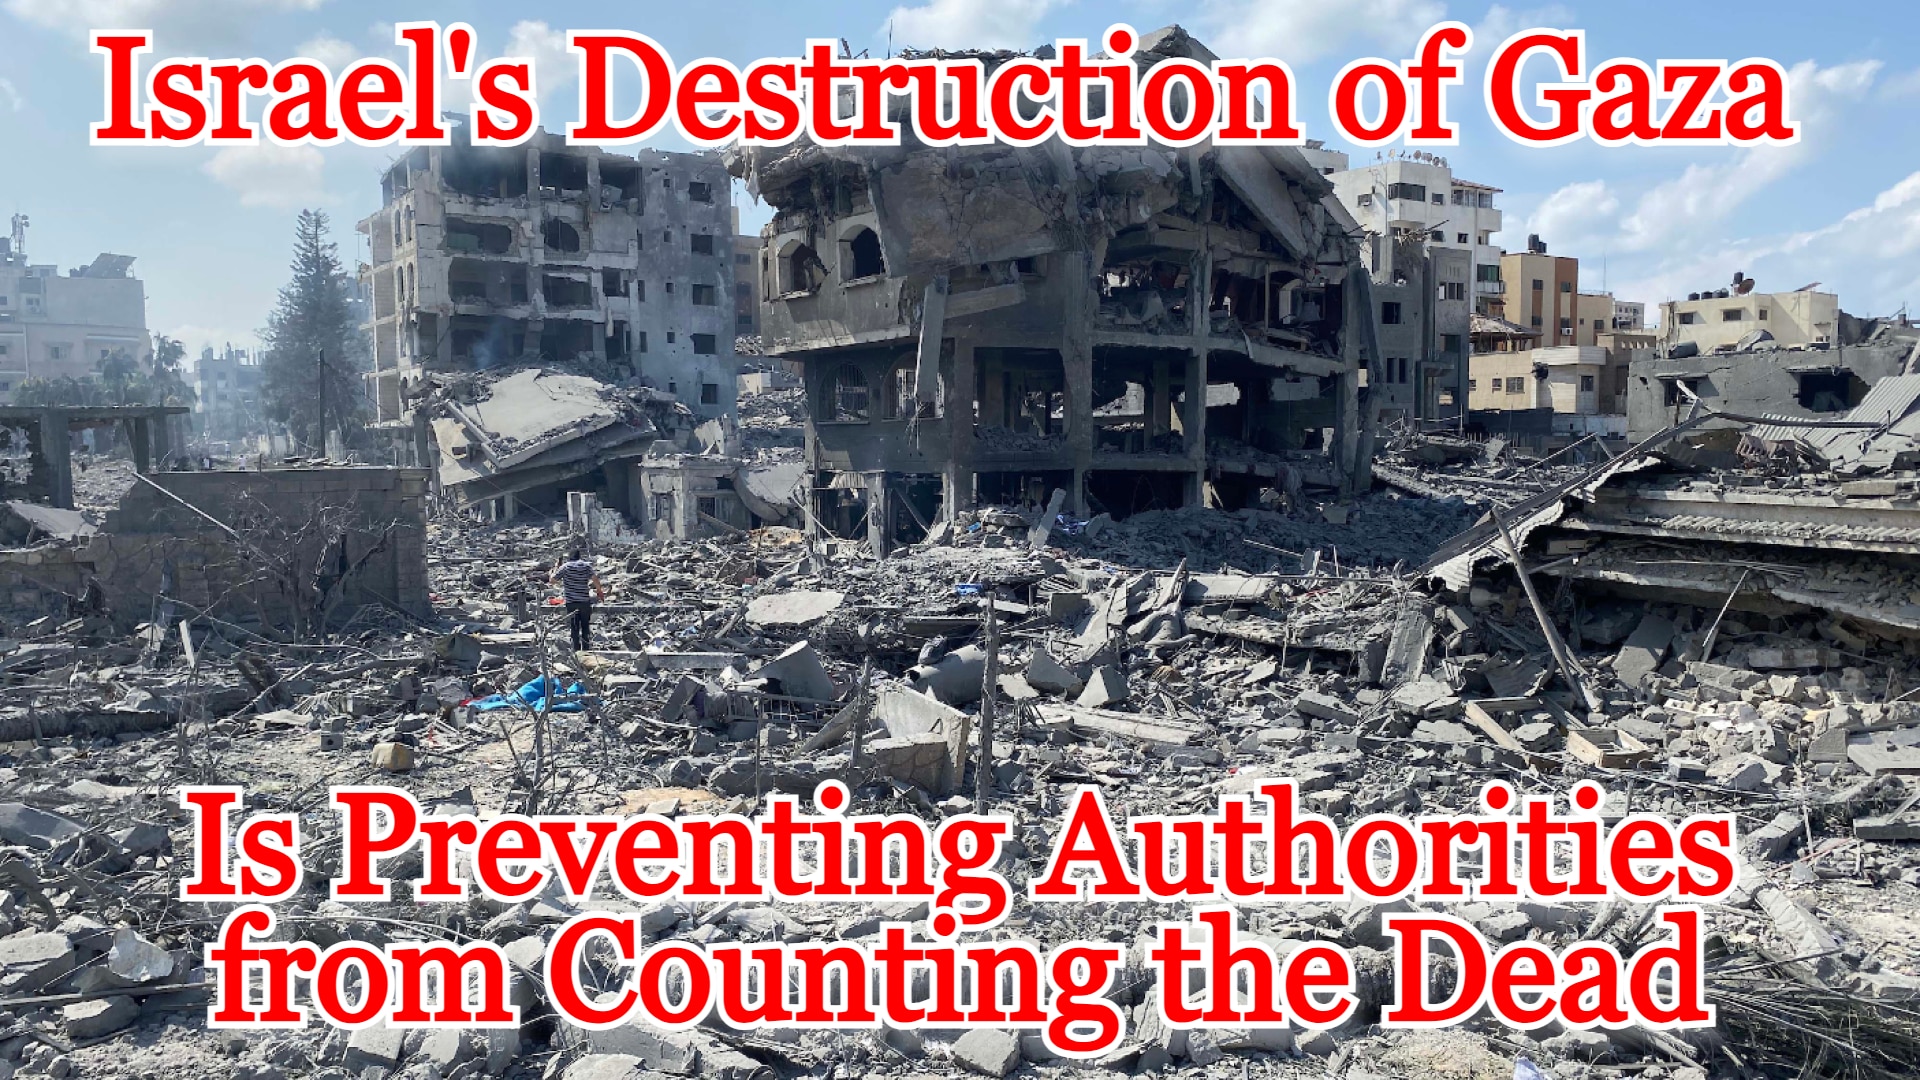 COI #503: Israel’s Destruction of Gaza Is Preventing Authorities from Counting the Dead